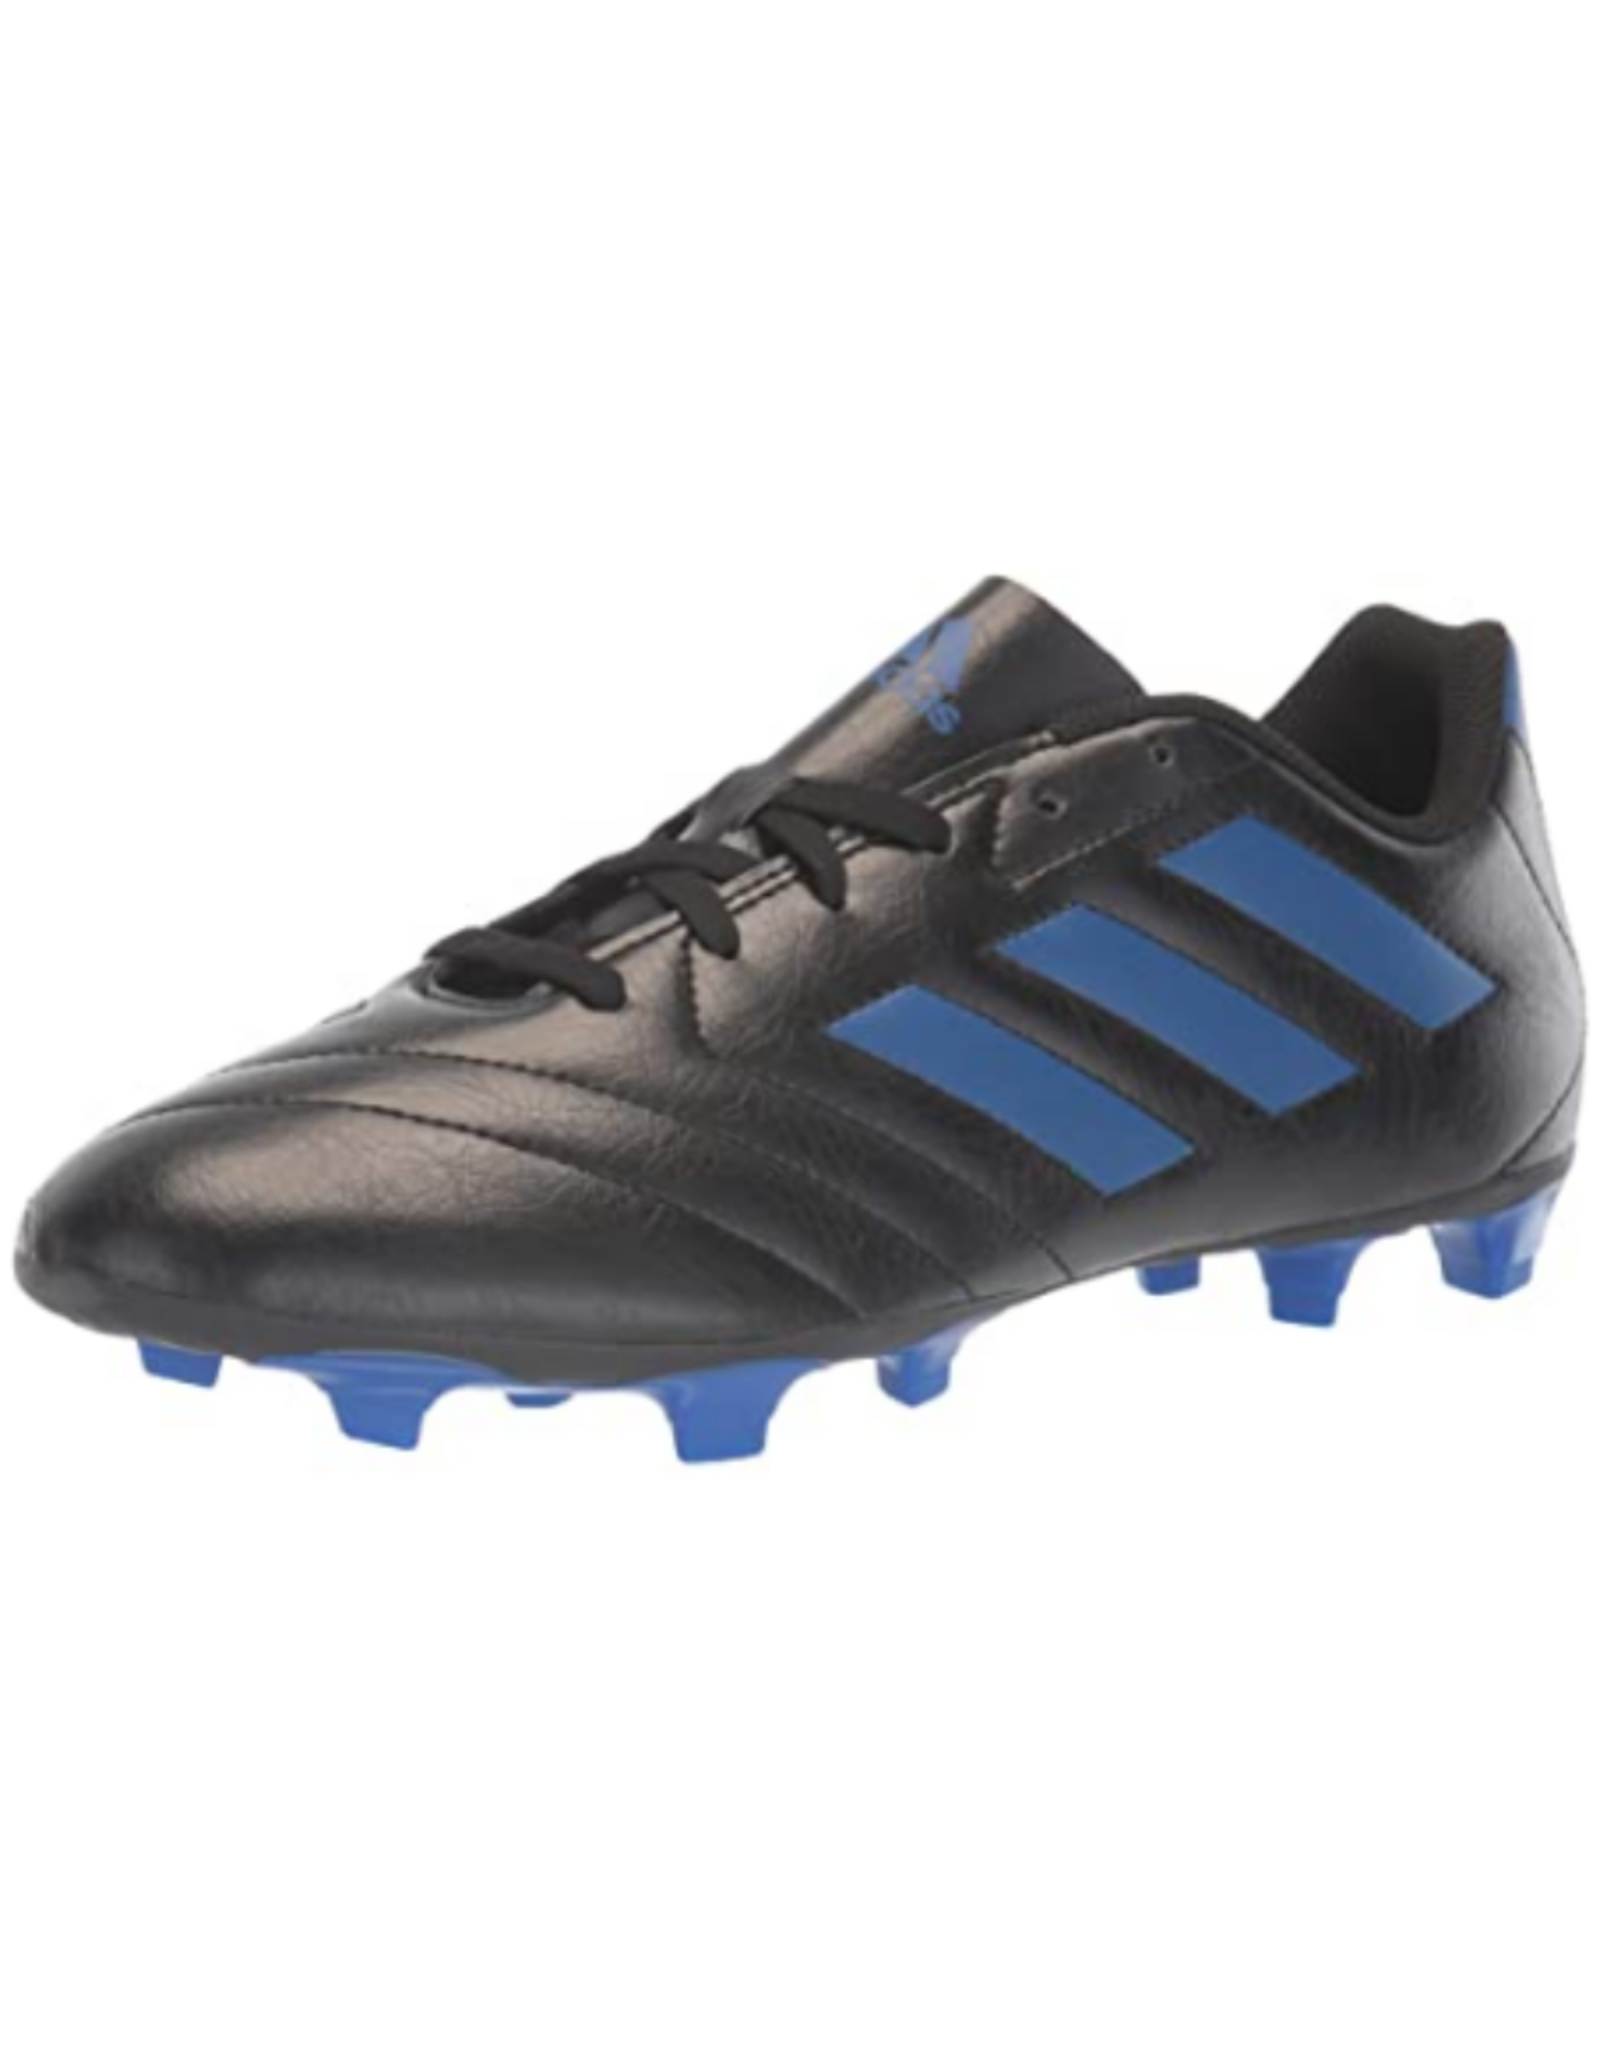 Goletto Soccer Cleats Black Navy 